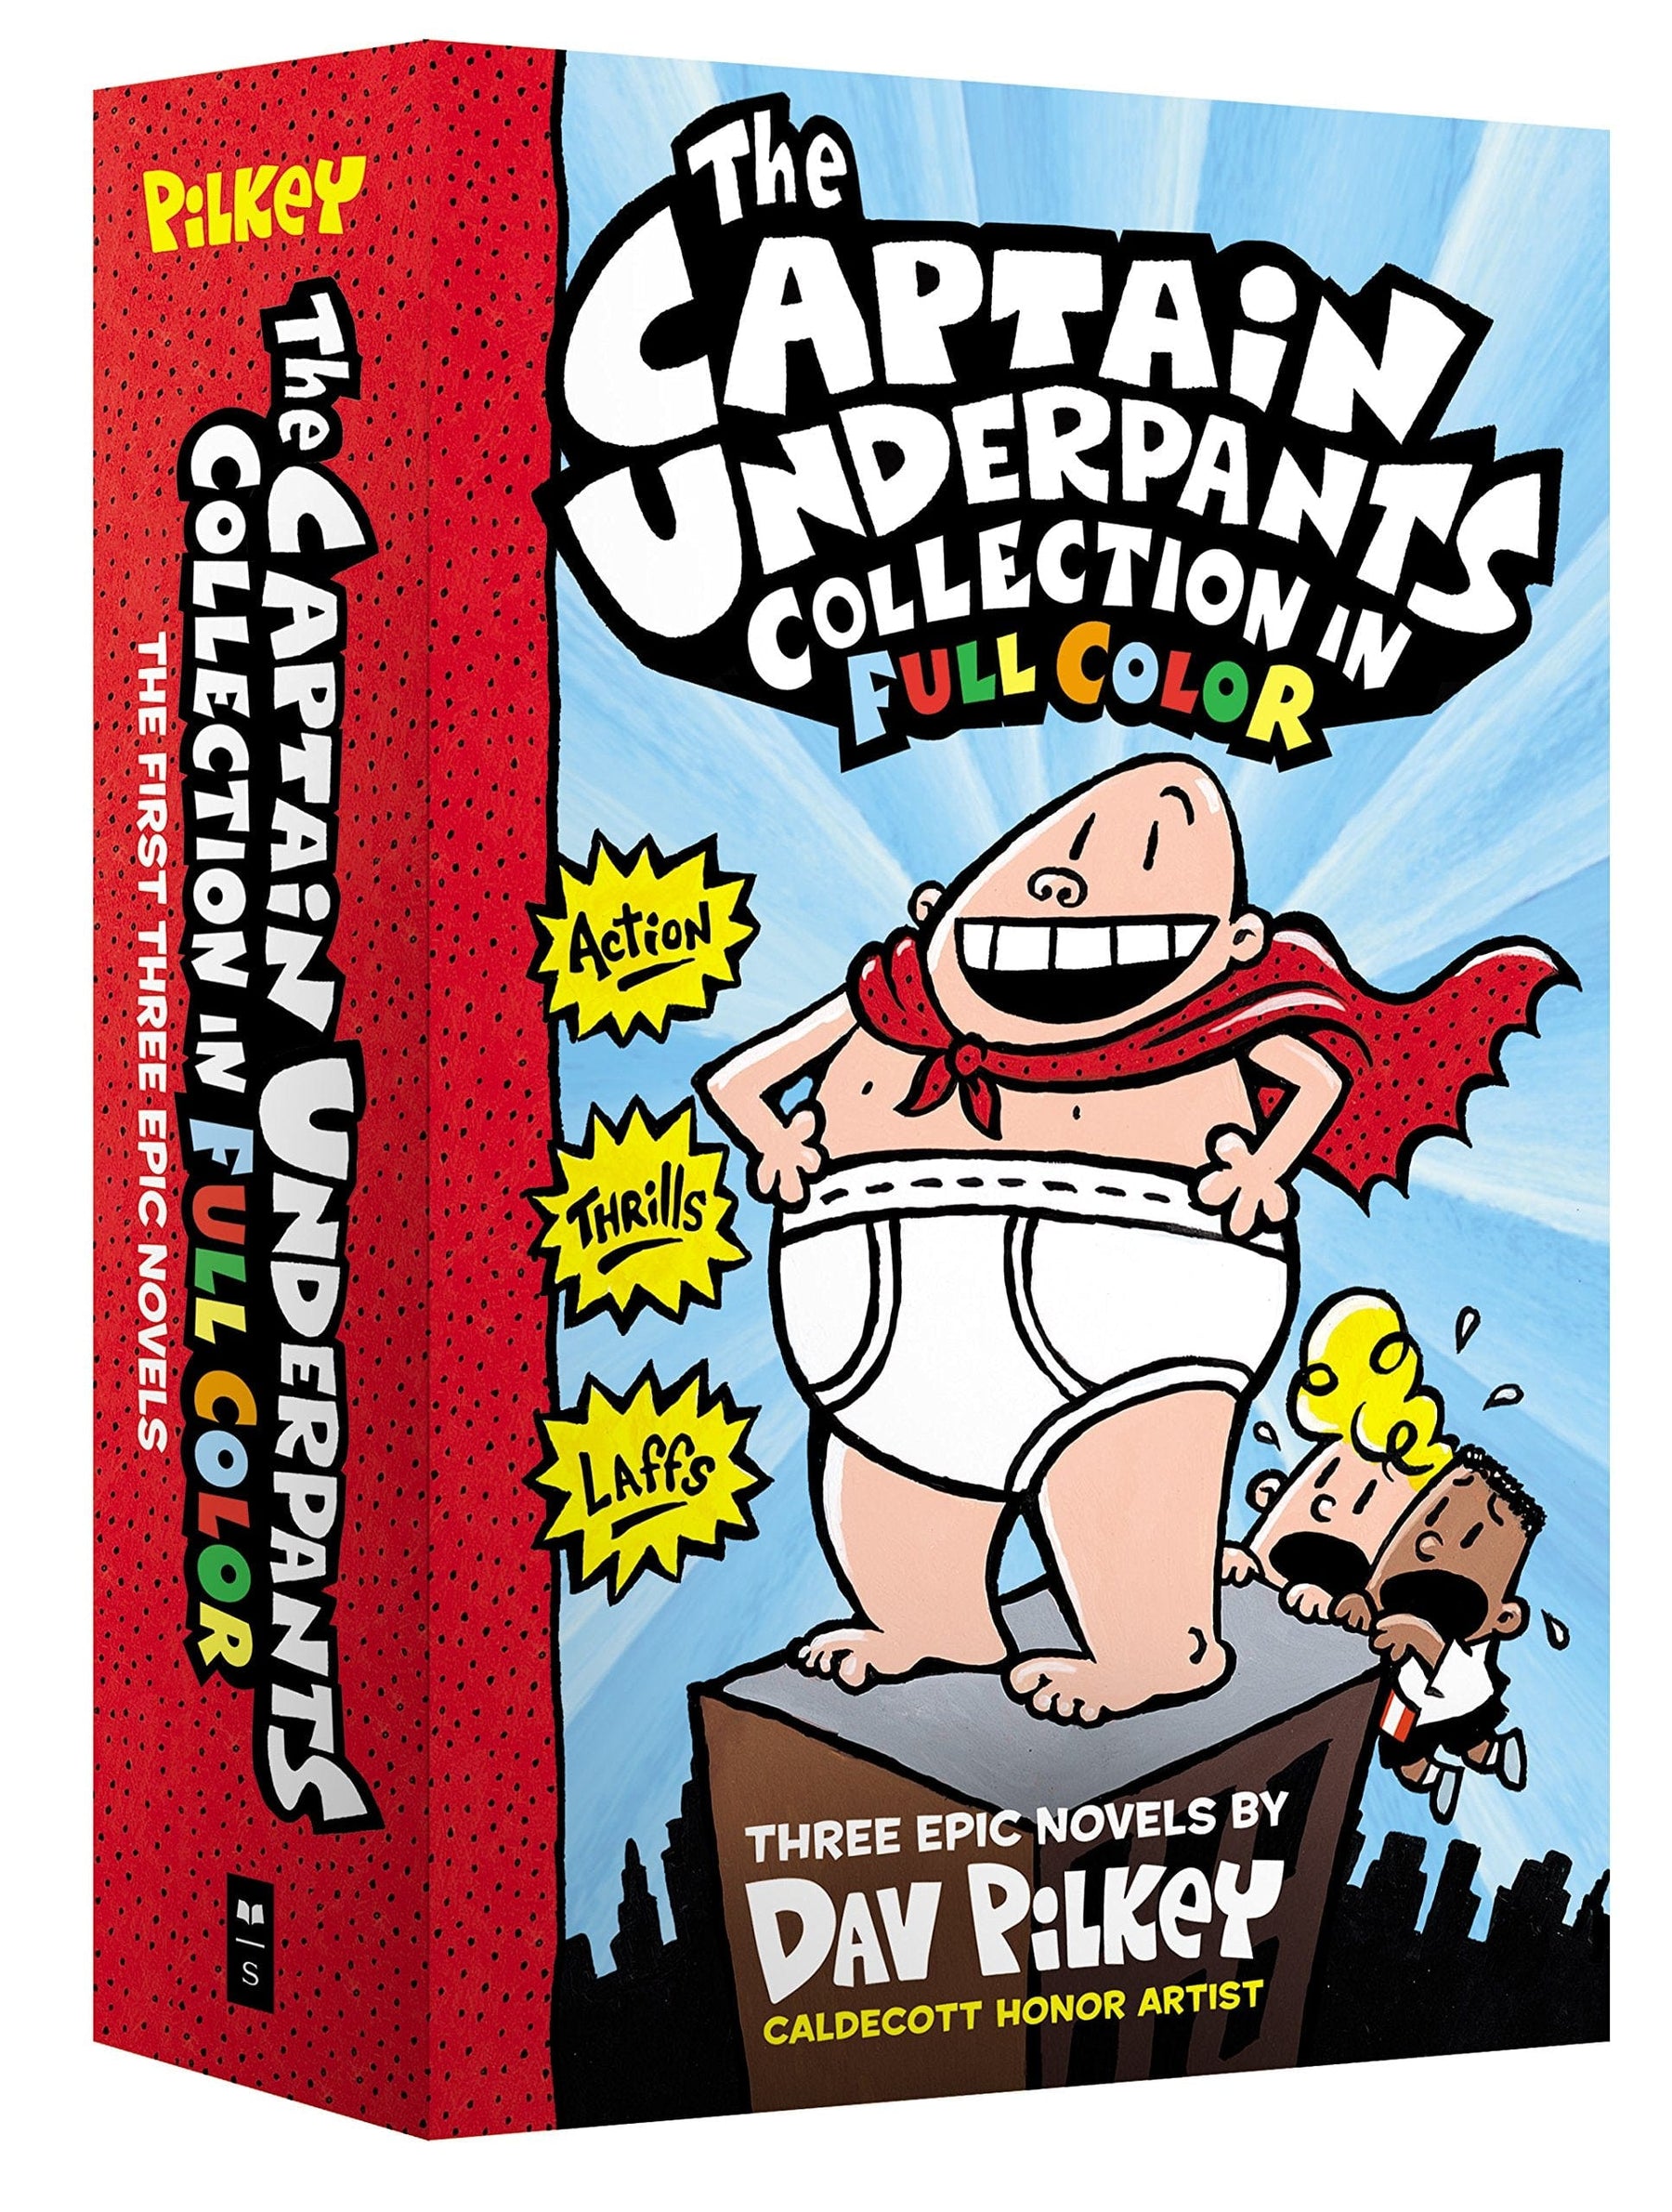 Captain Underpants: Collection in Full Color - Vol. 1/2/3 HC Box Set - Third Eye